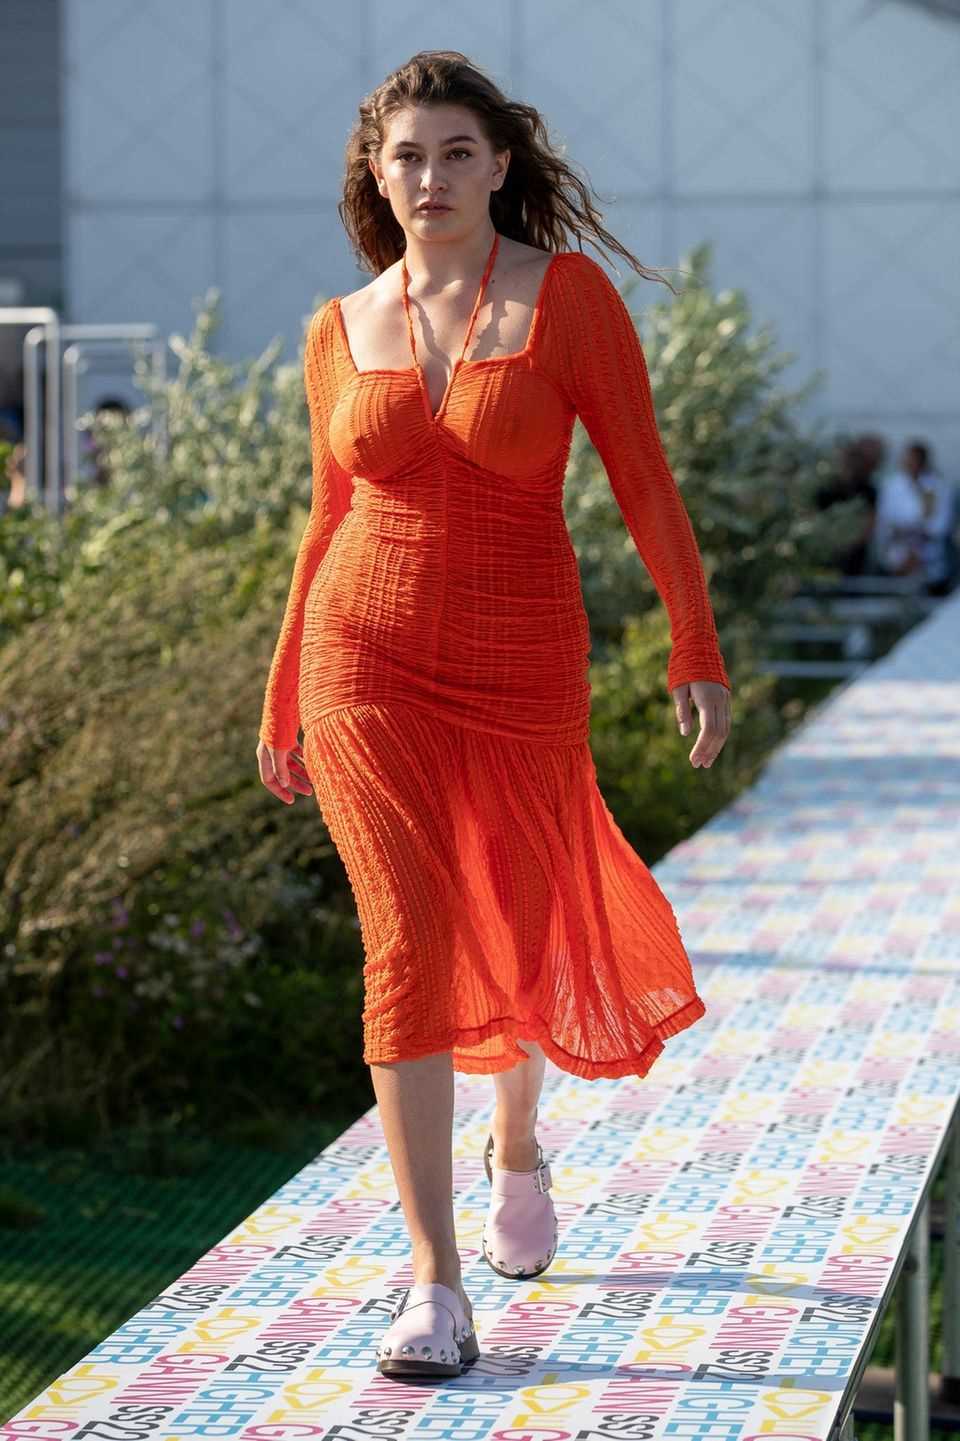 The trend color for the next season: tangerine